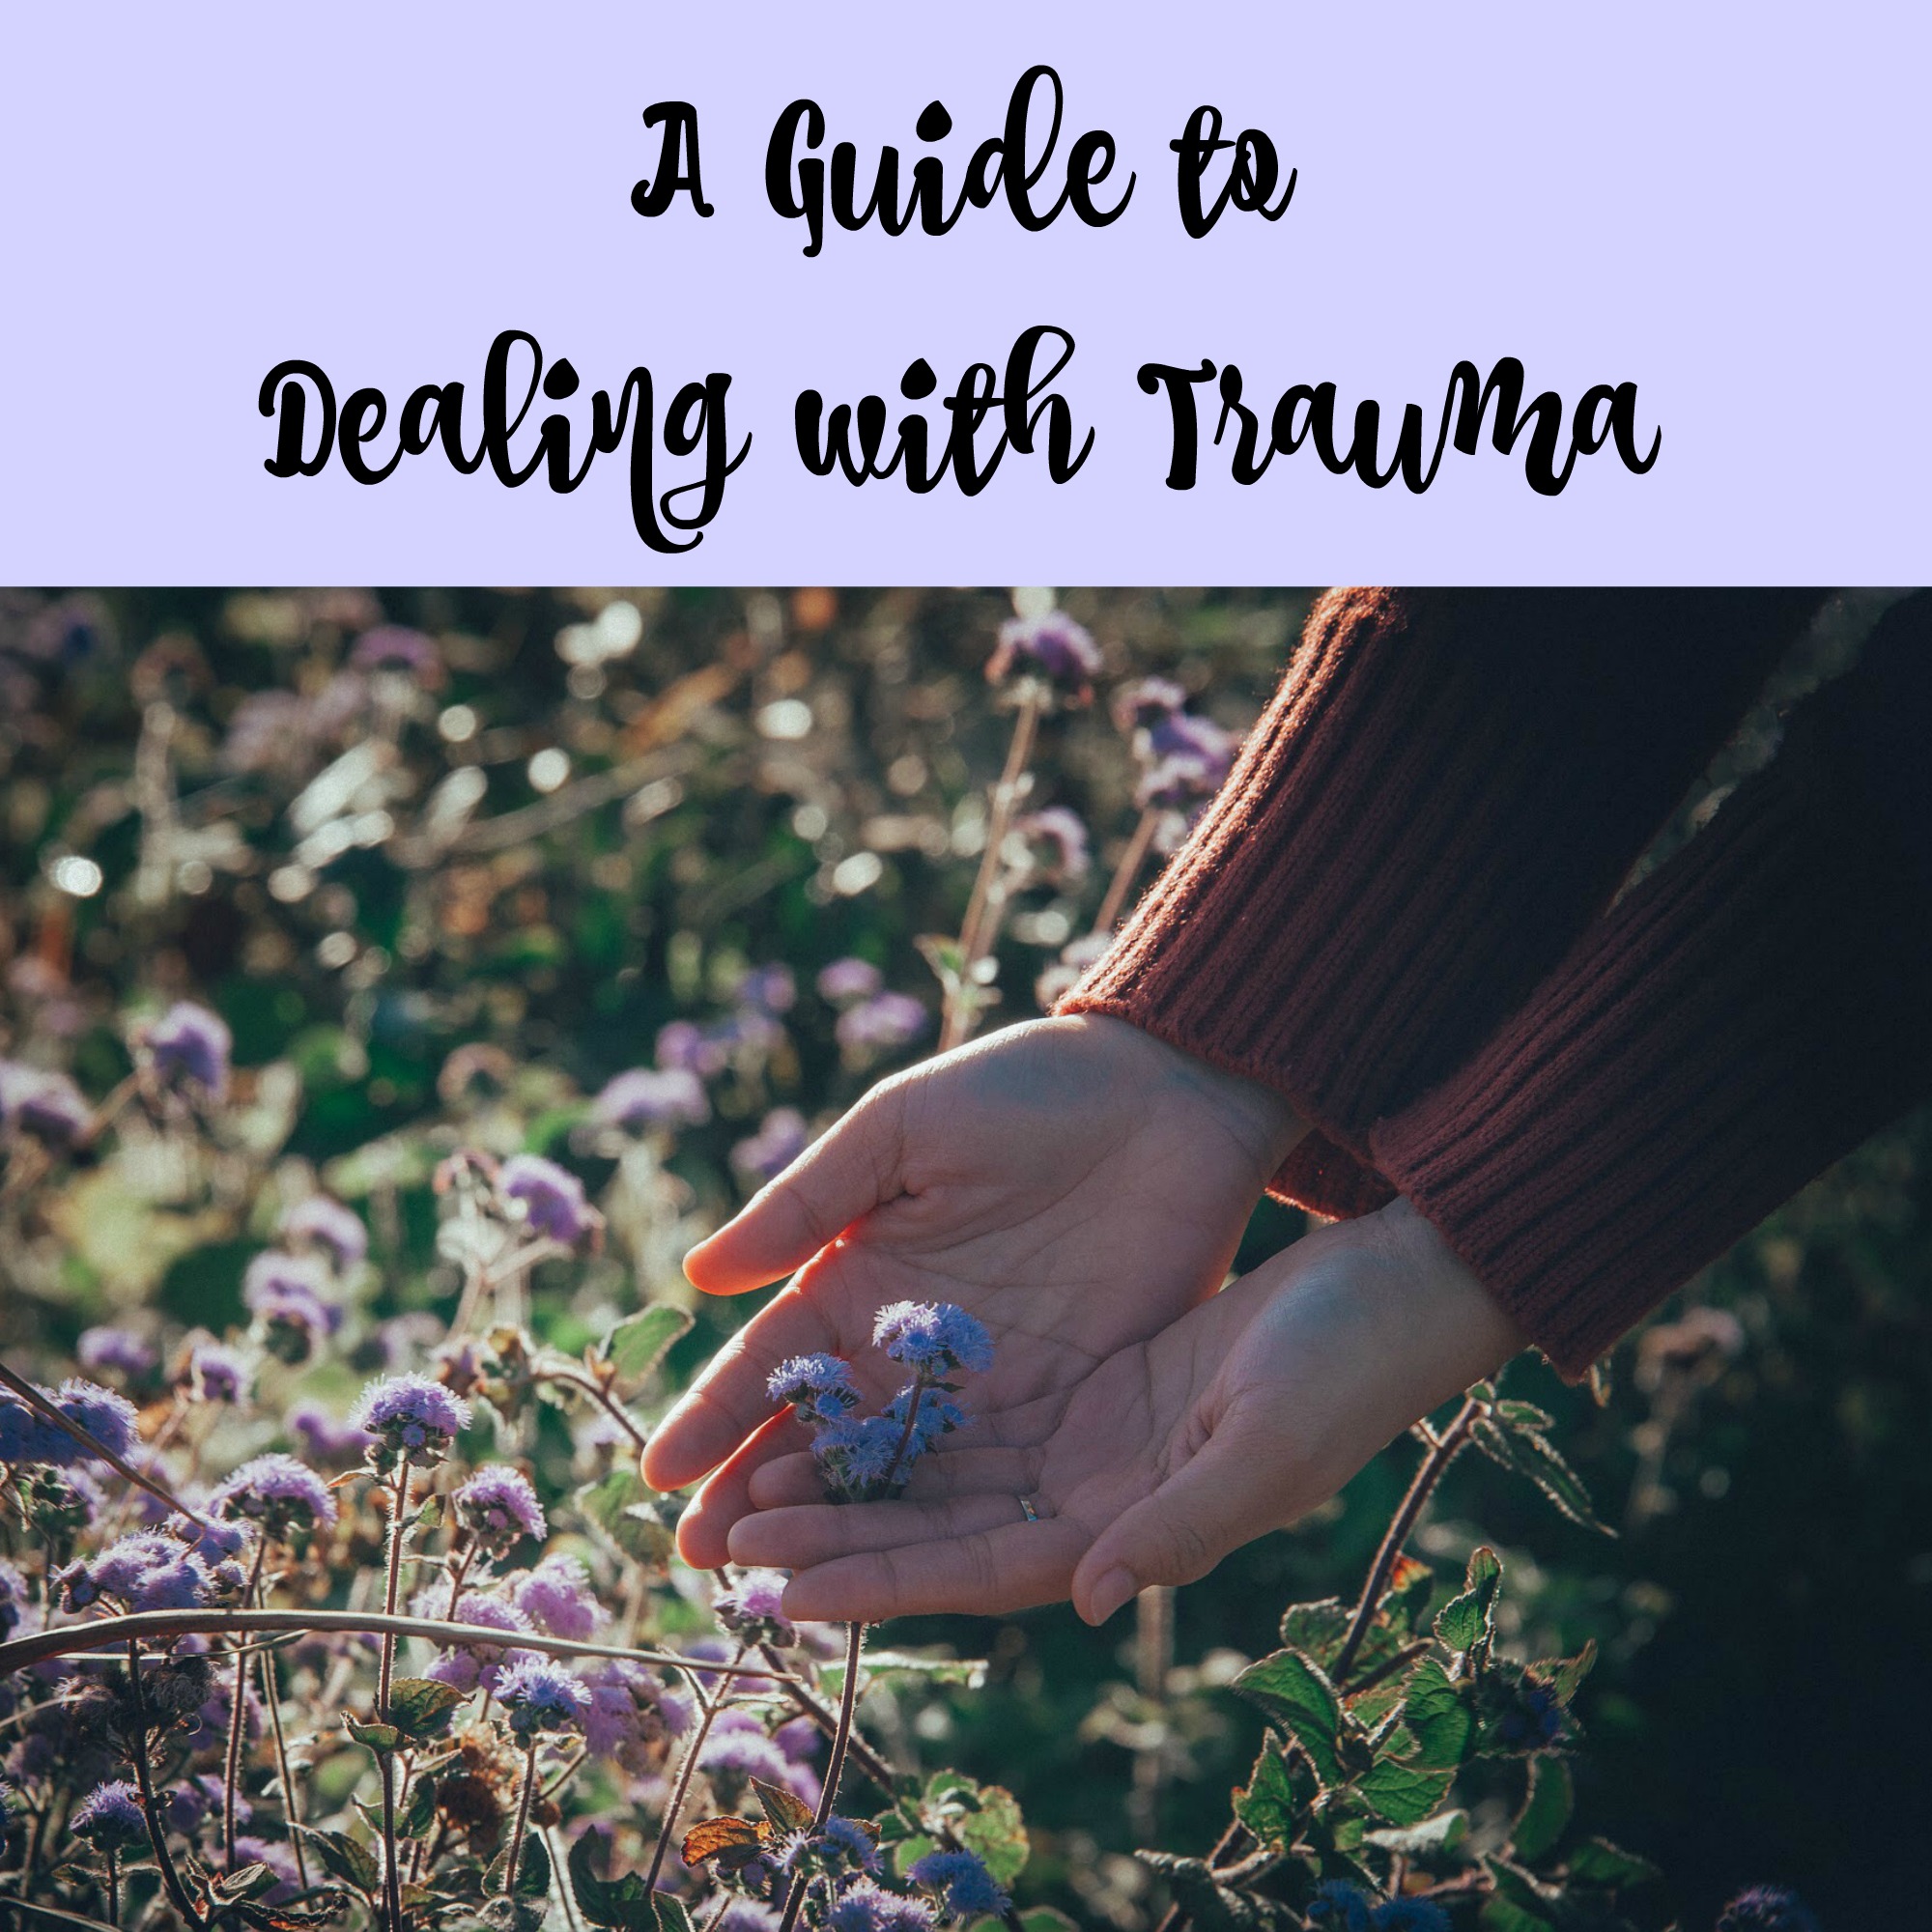 A Guide to Dealing with Trauma